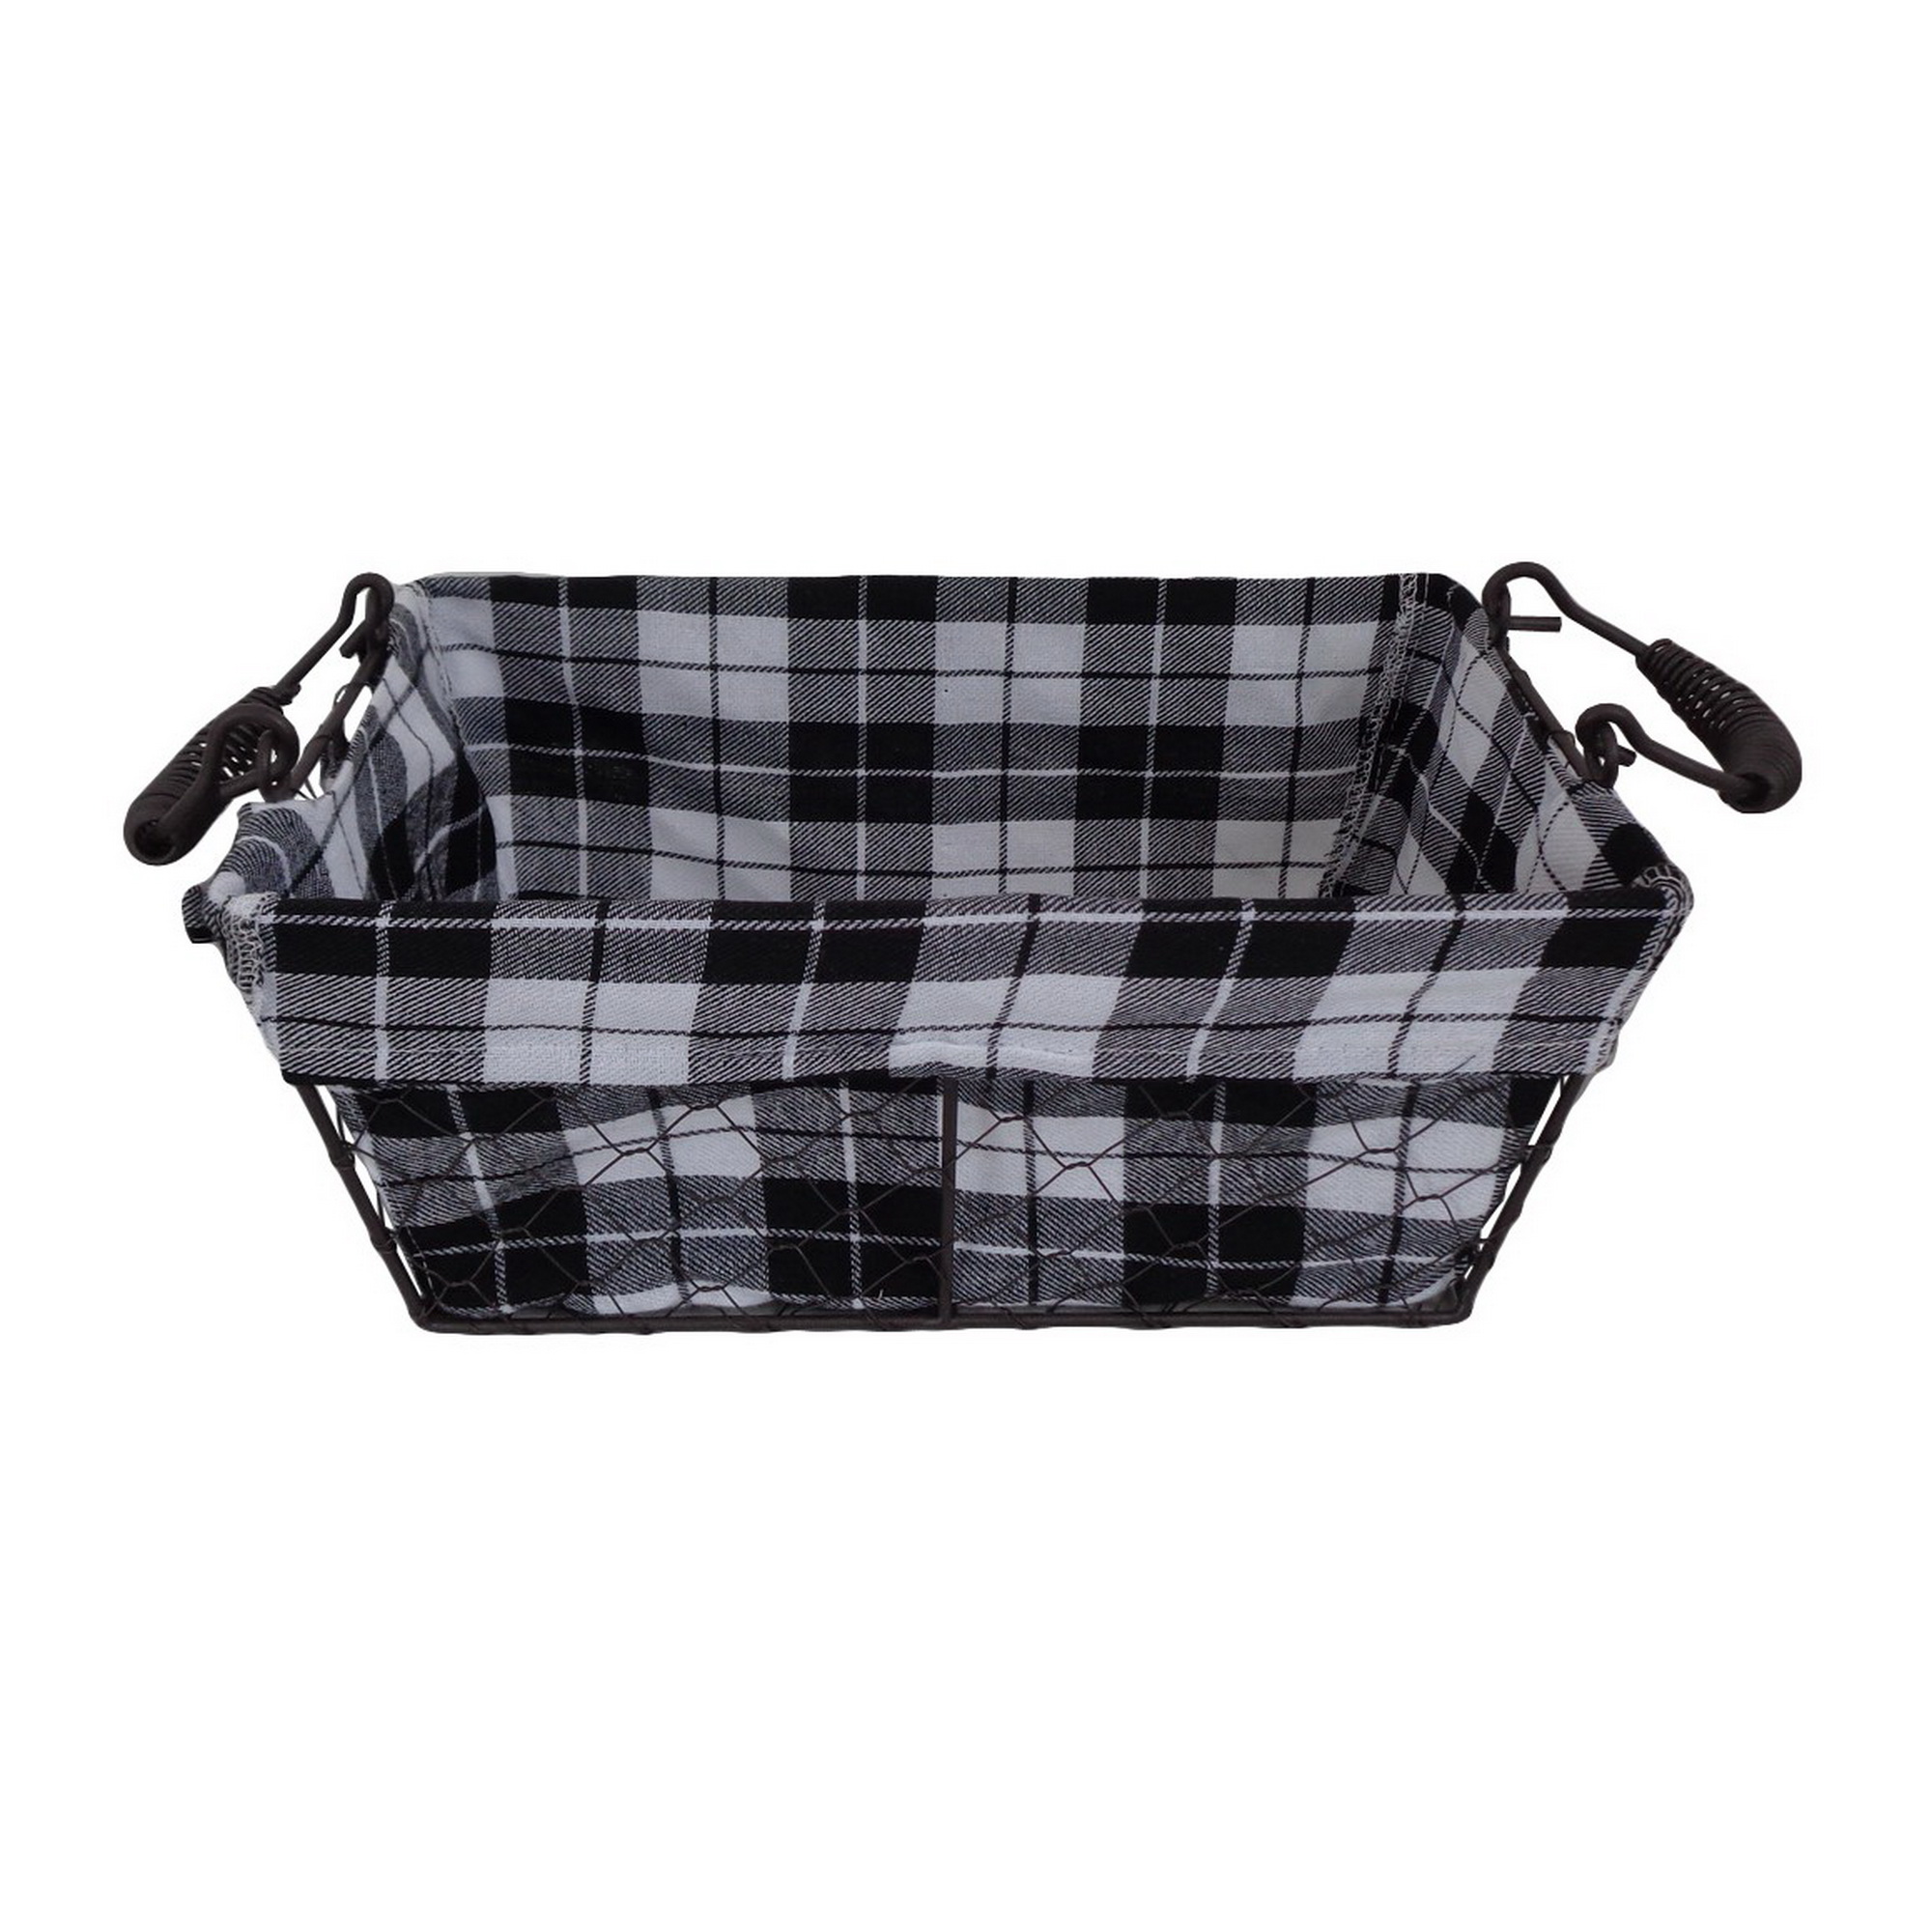 Jaclyn Smith Wired Basket with Buffalo Plaid Lining